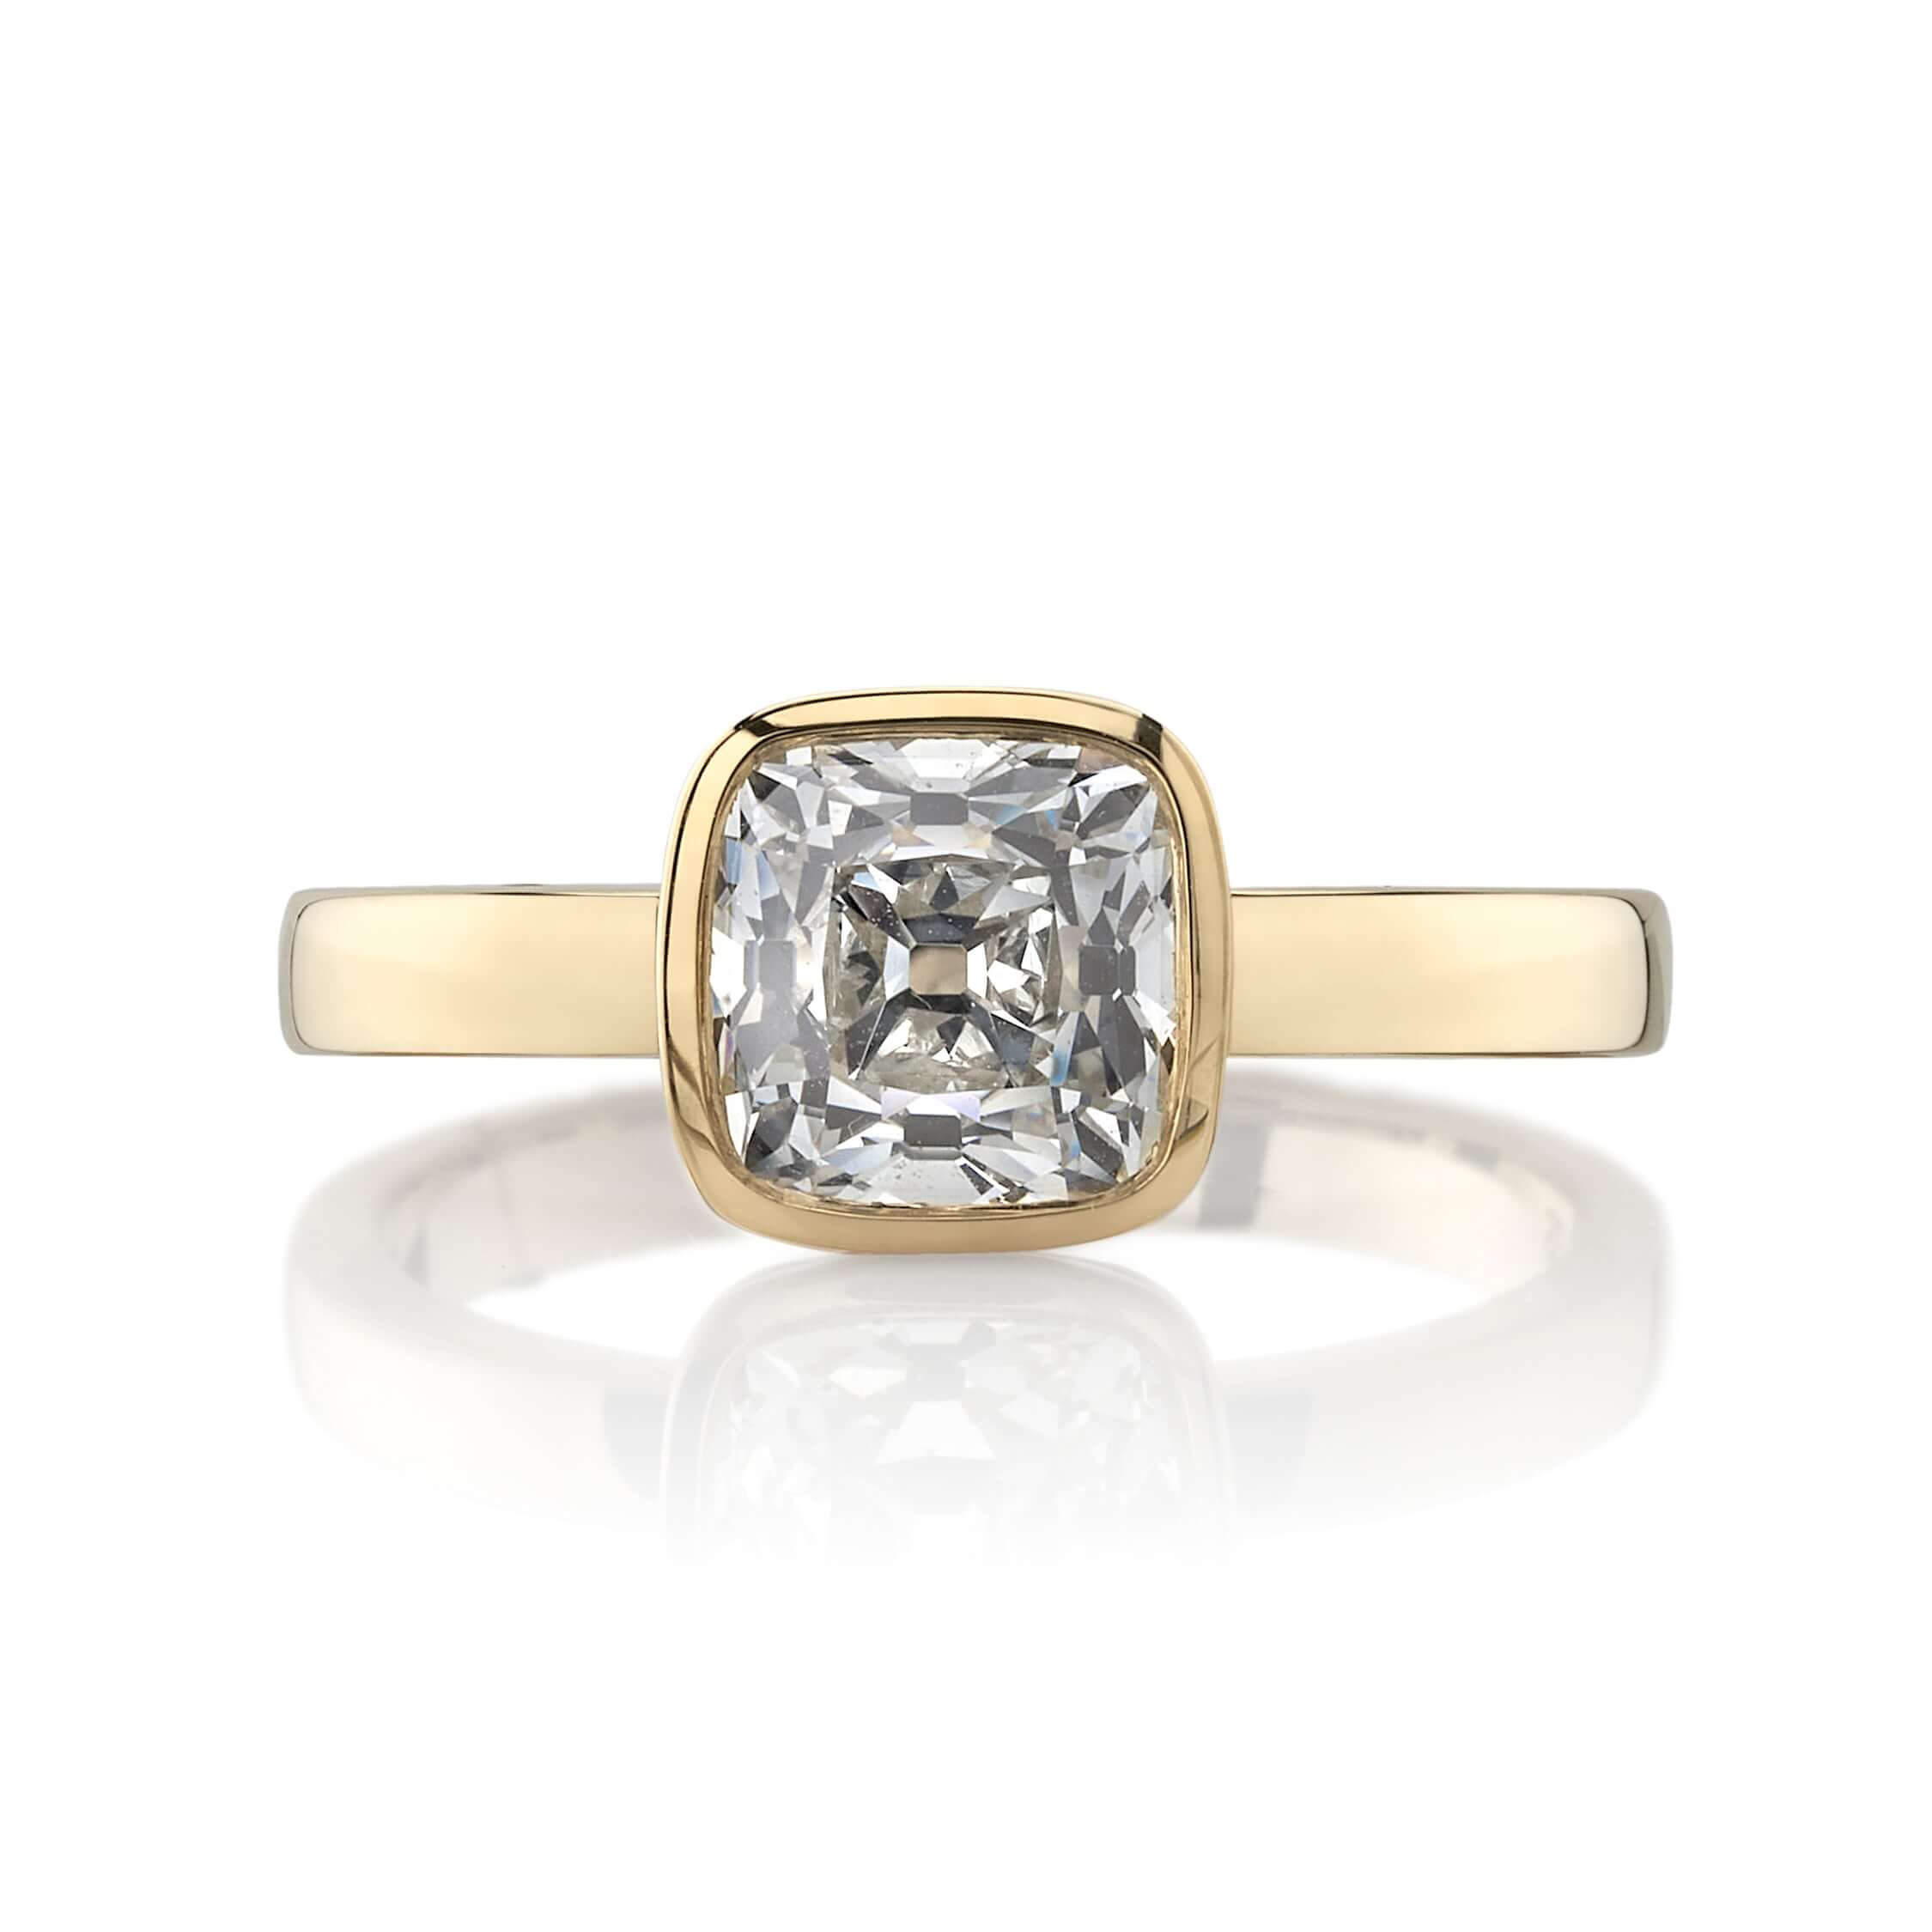 SINGLE STONE WYLER RING featuring 1.64ct I/VS1 GIA certified antique cushion cut diamond set in a handcrafted 18K yellow gold mounting.